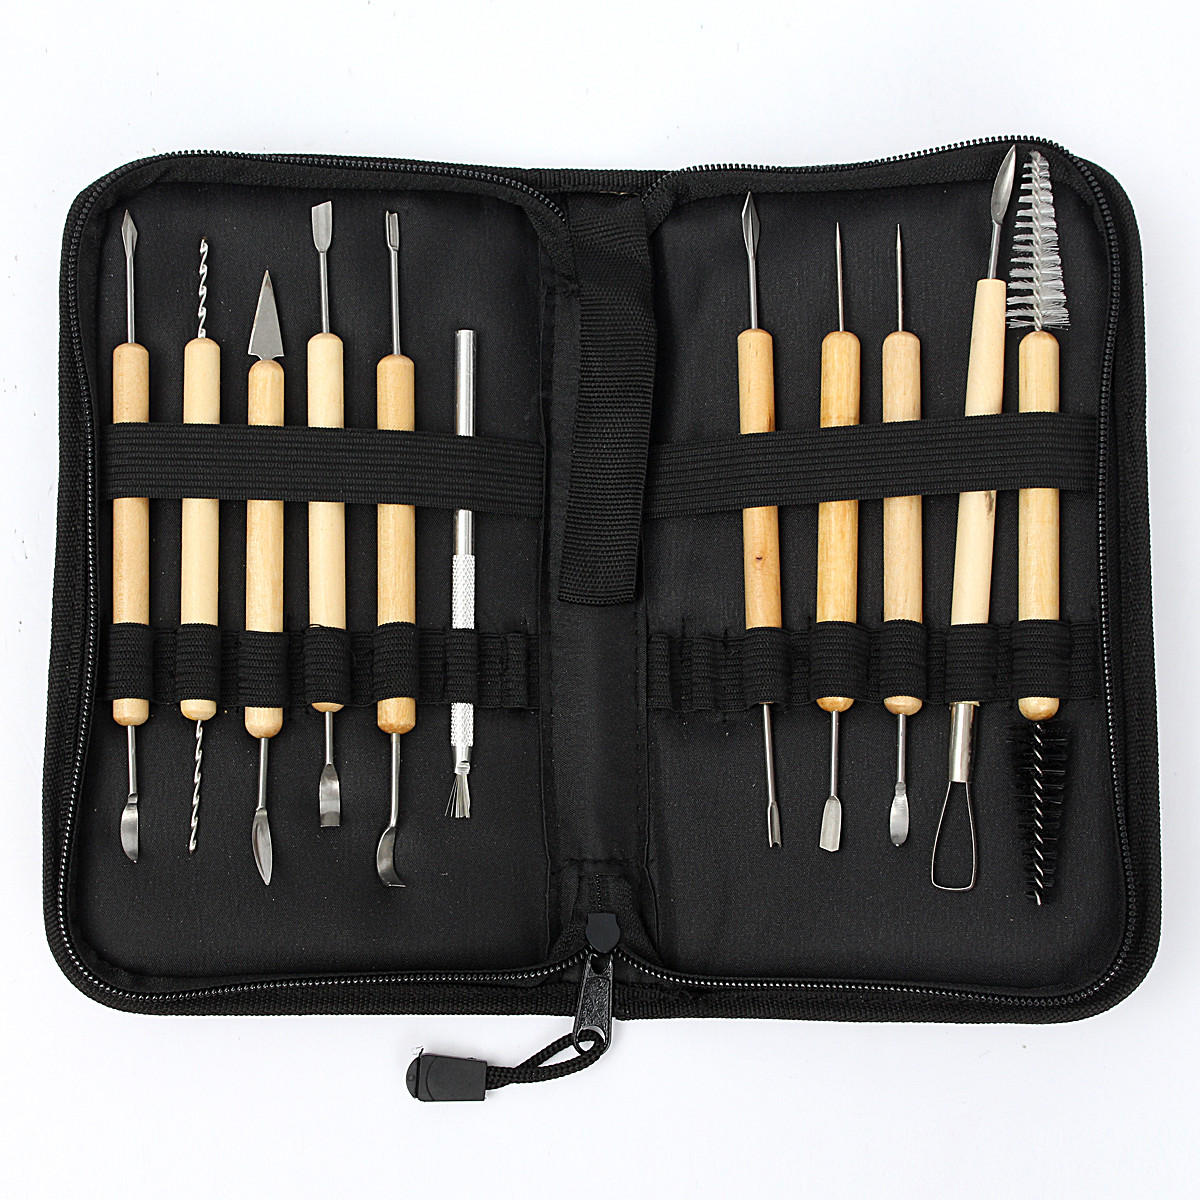 

11pcs Clay Sculpting Wax Carving Pottery Tools Shapers Polymer Modeling Set